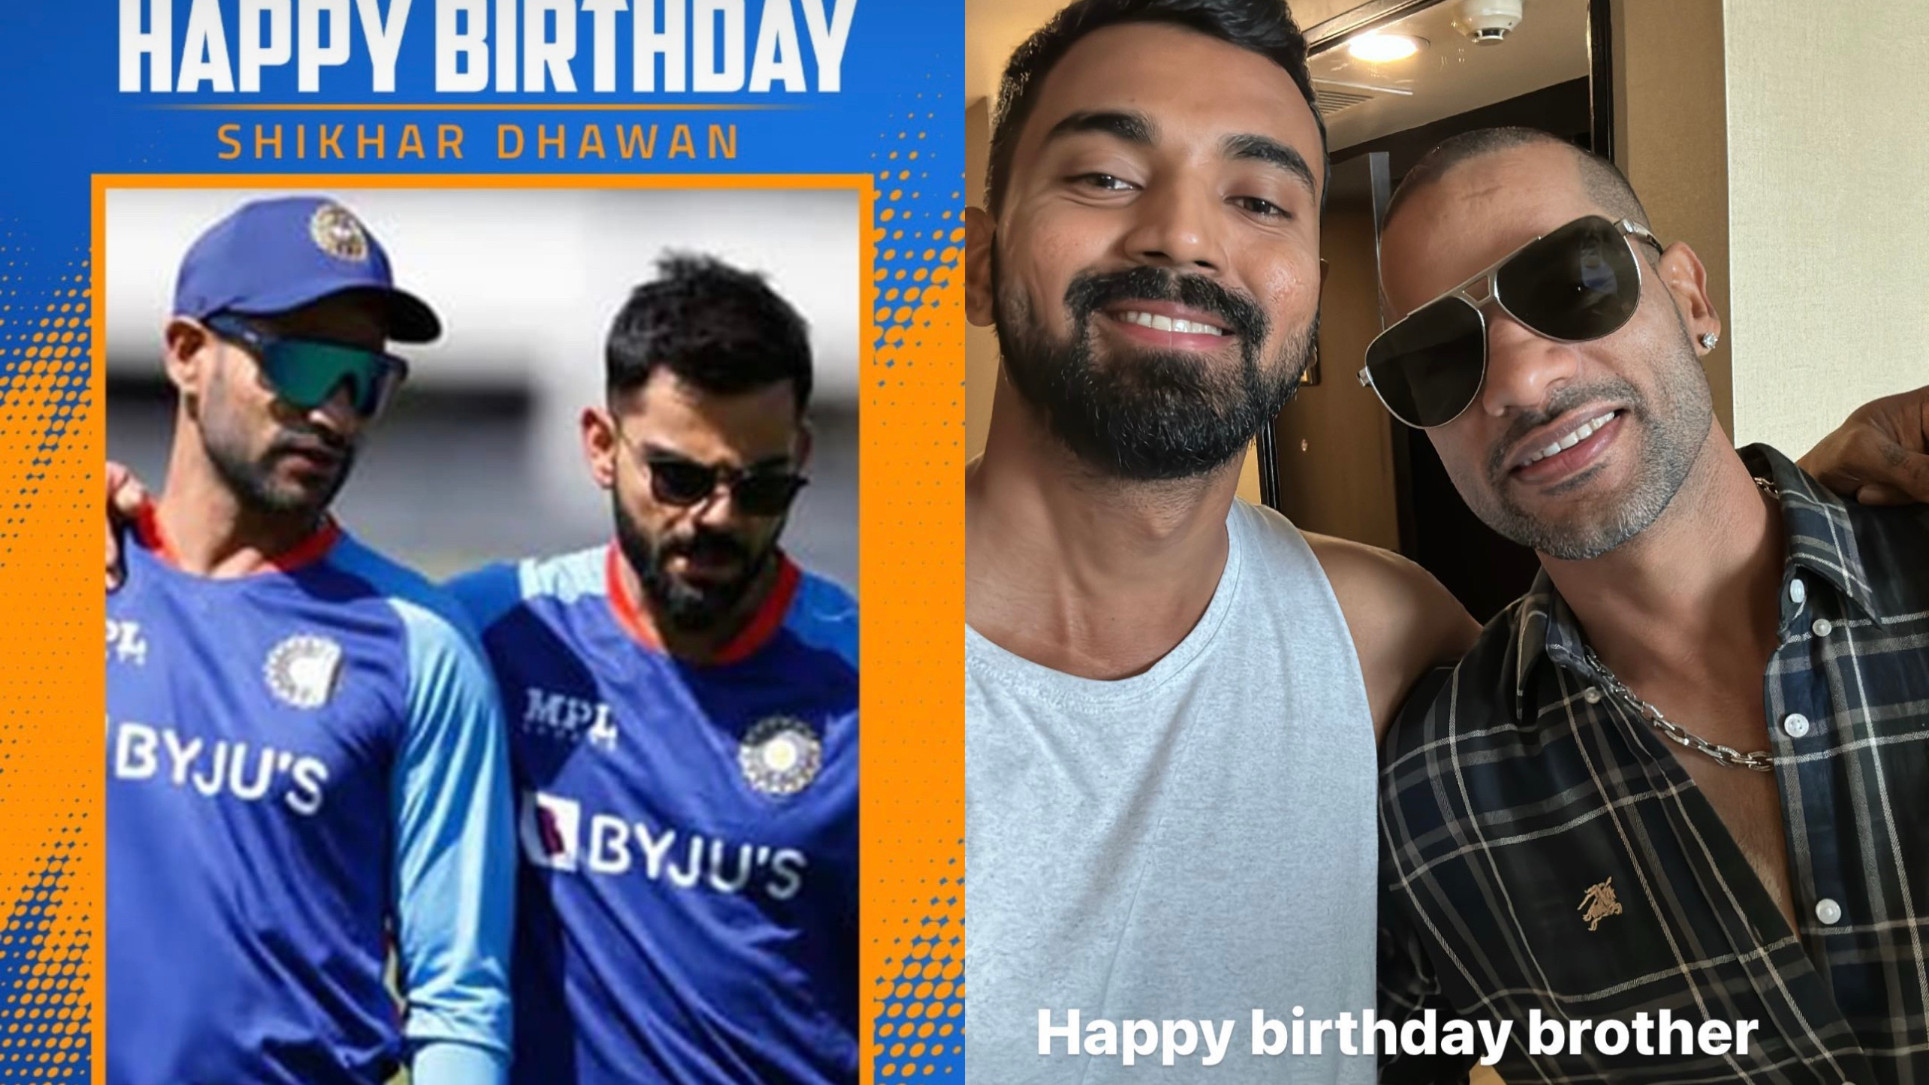 Shikhar Dhawan celebrates his 37th birthday and receives wishes from Indian cricket fraternity